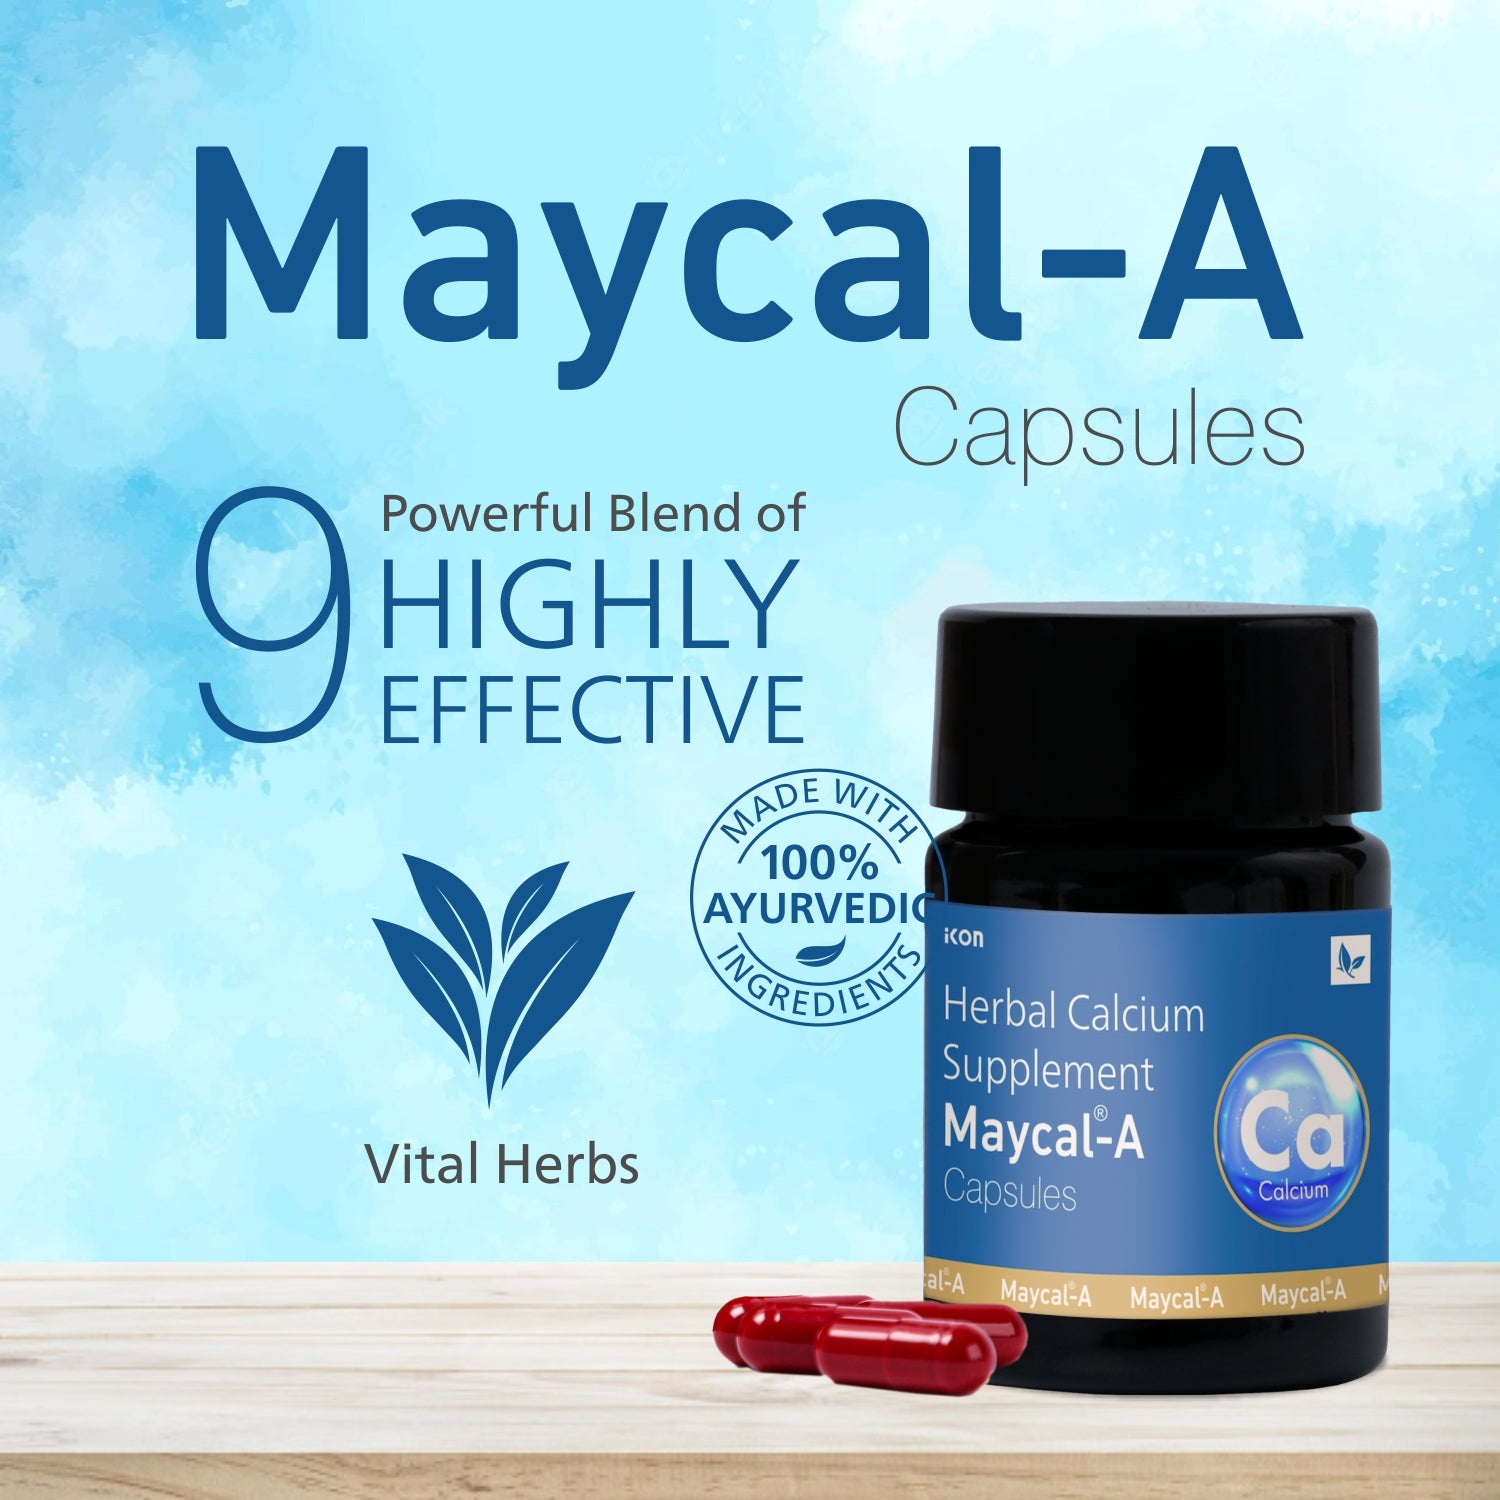 Maycal-A Capsules (10 Caps)